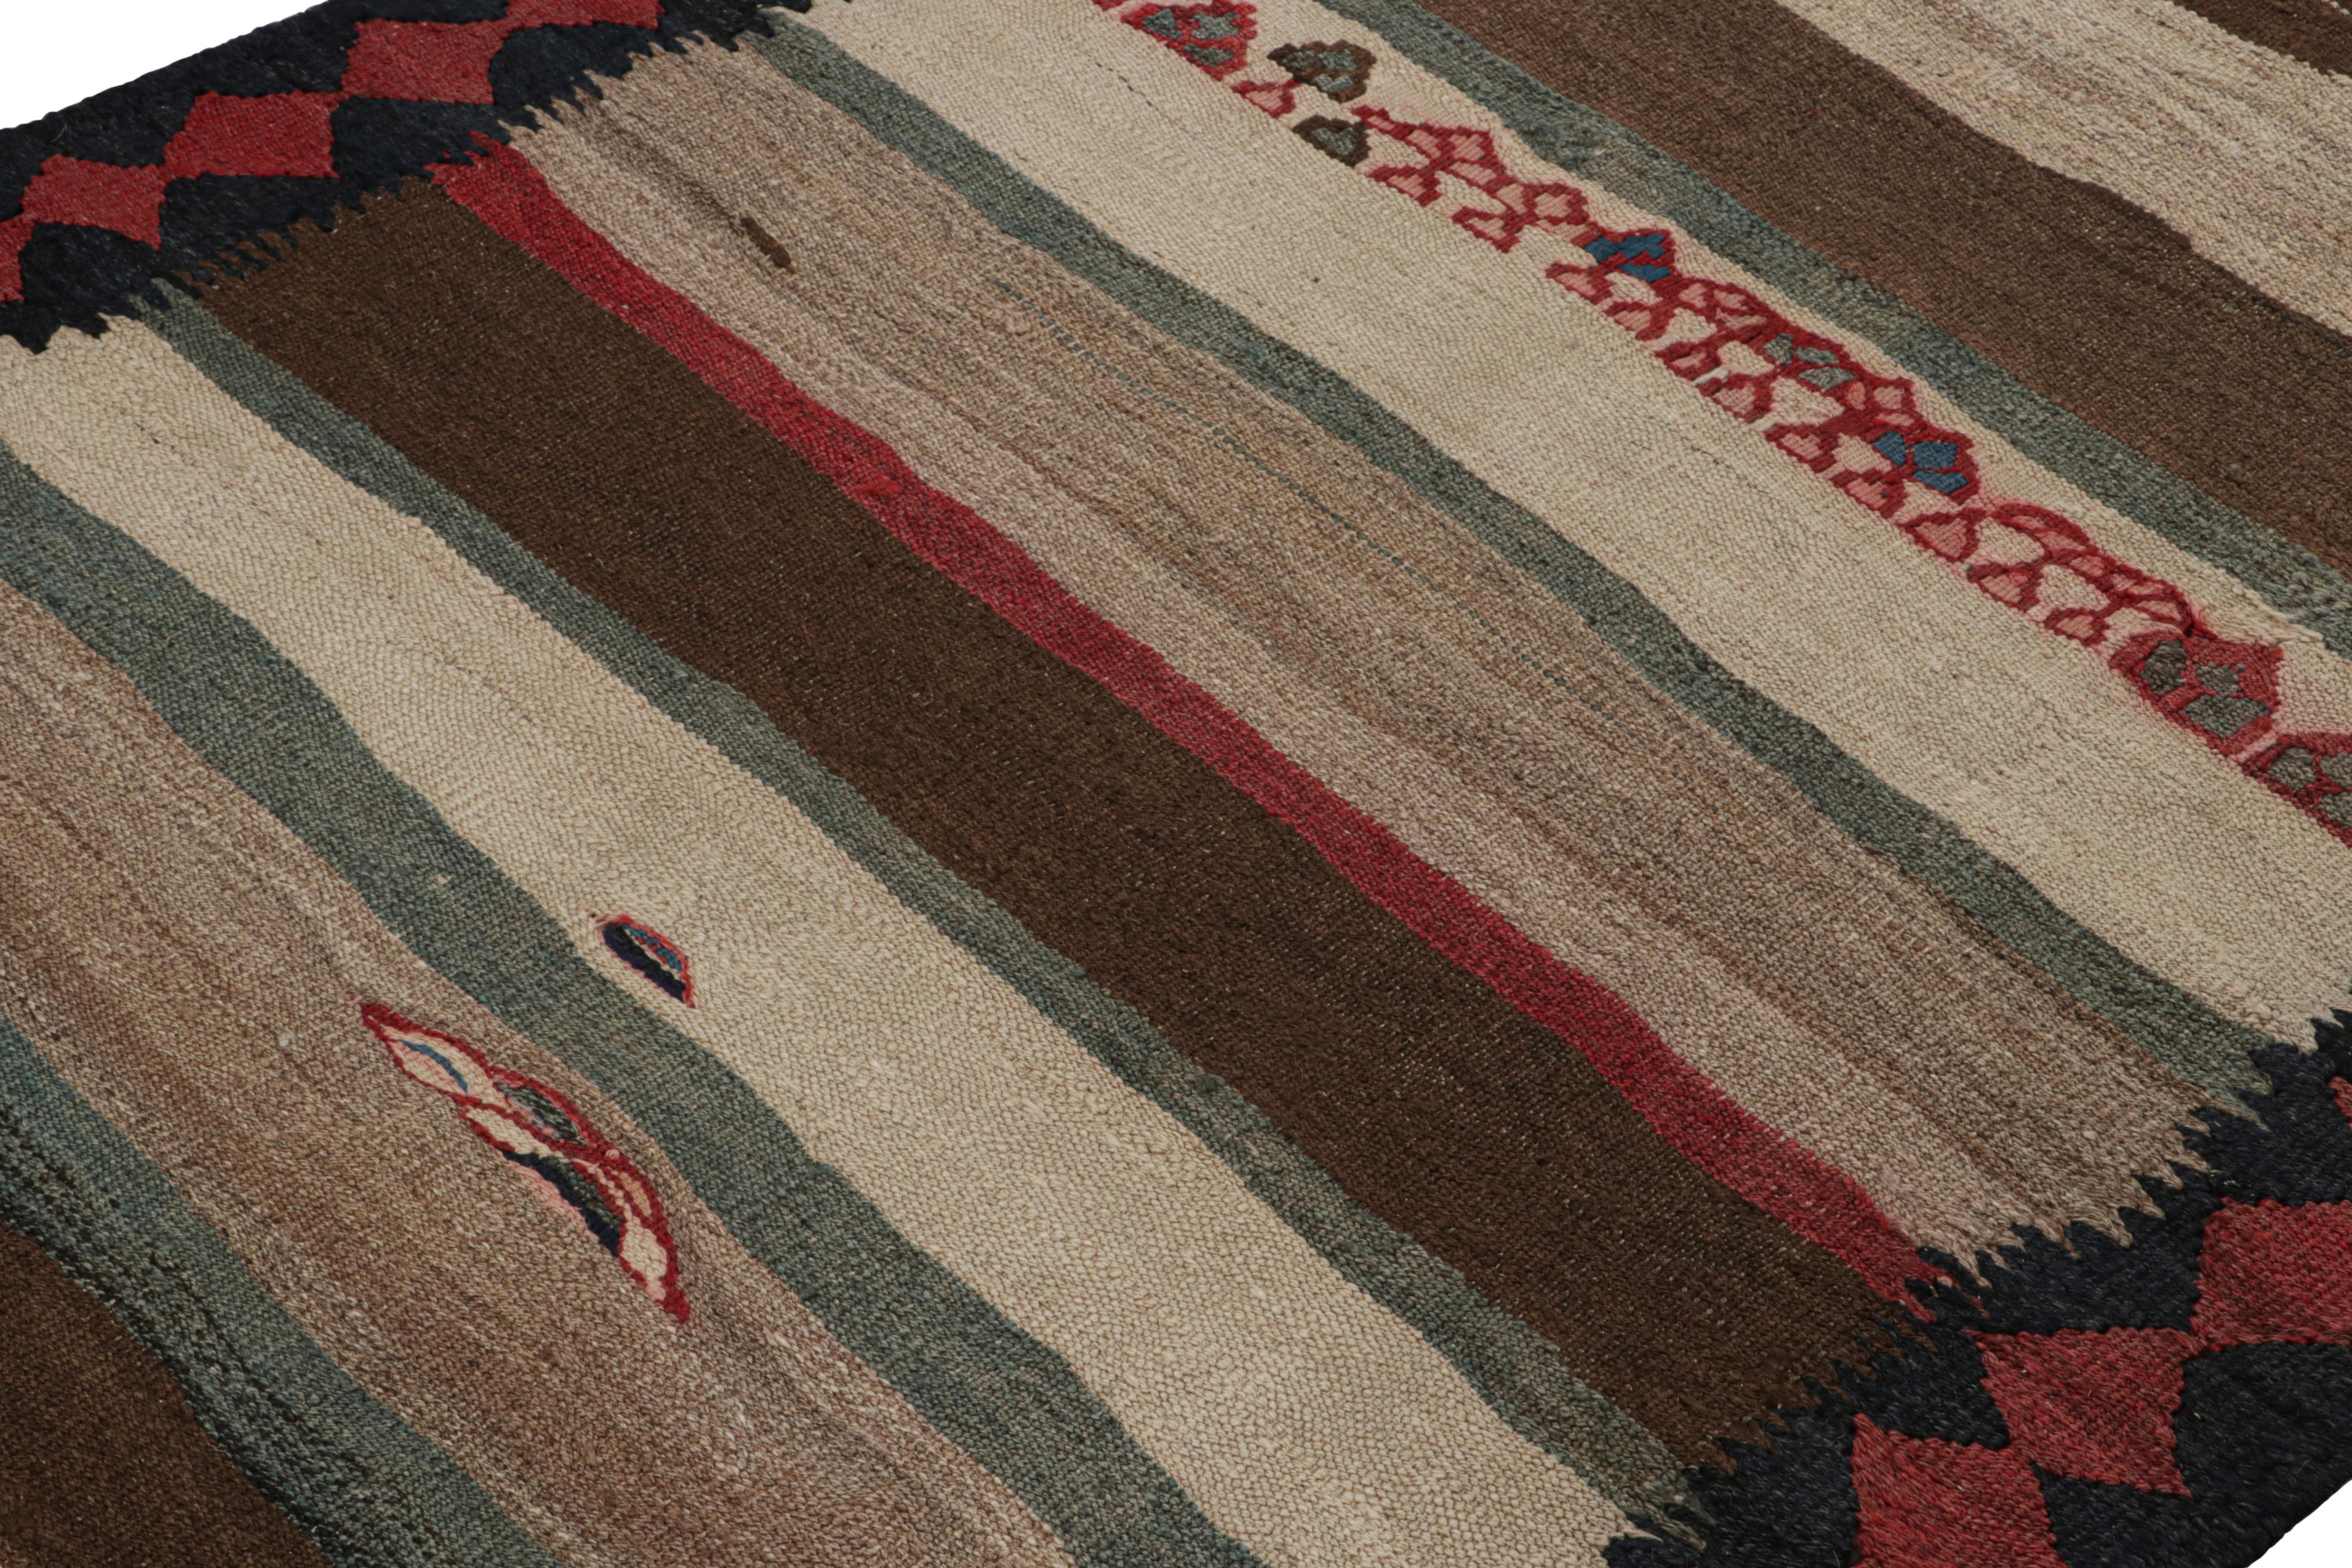 Hand-Woven Vintage Shahsavan Persian tribal Kilim rug, with Stripes, from Rug & Kilim For Sale